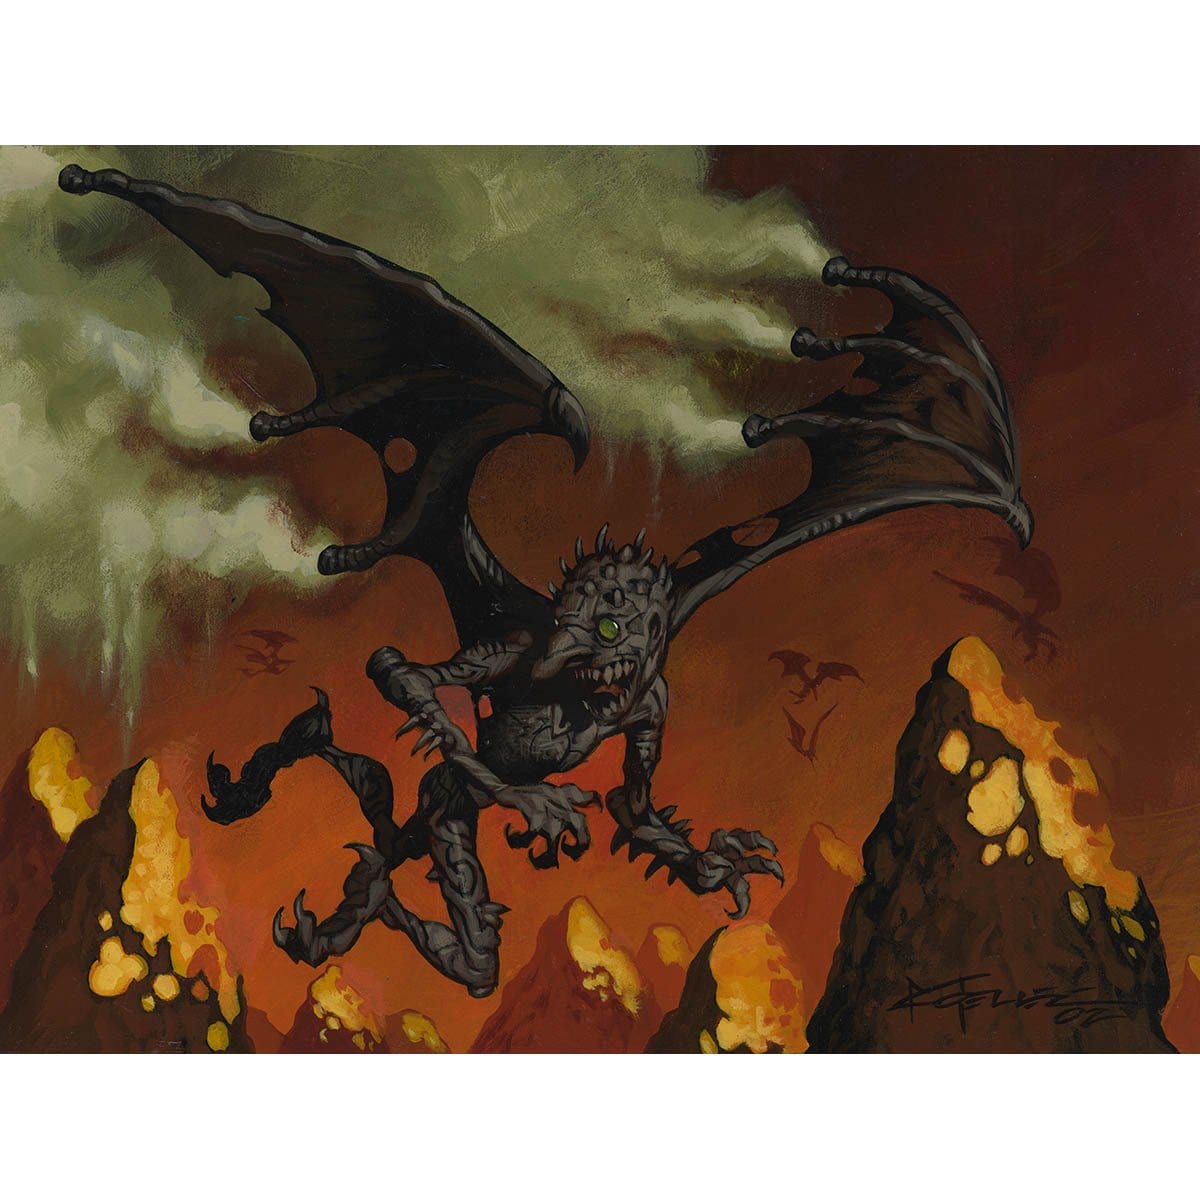 Chimney Imp Print - Print - Original Magic Art - Accessories for Magic the Gathering and other card games